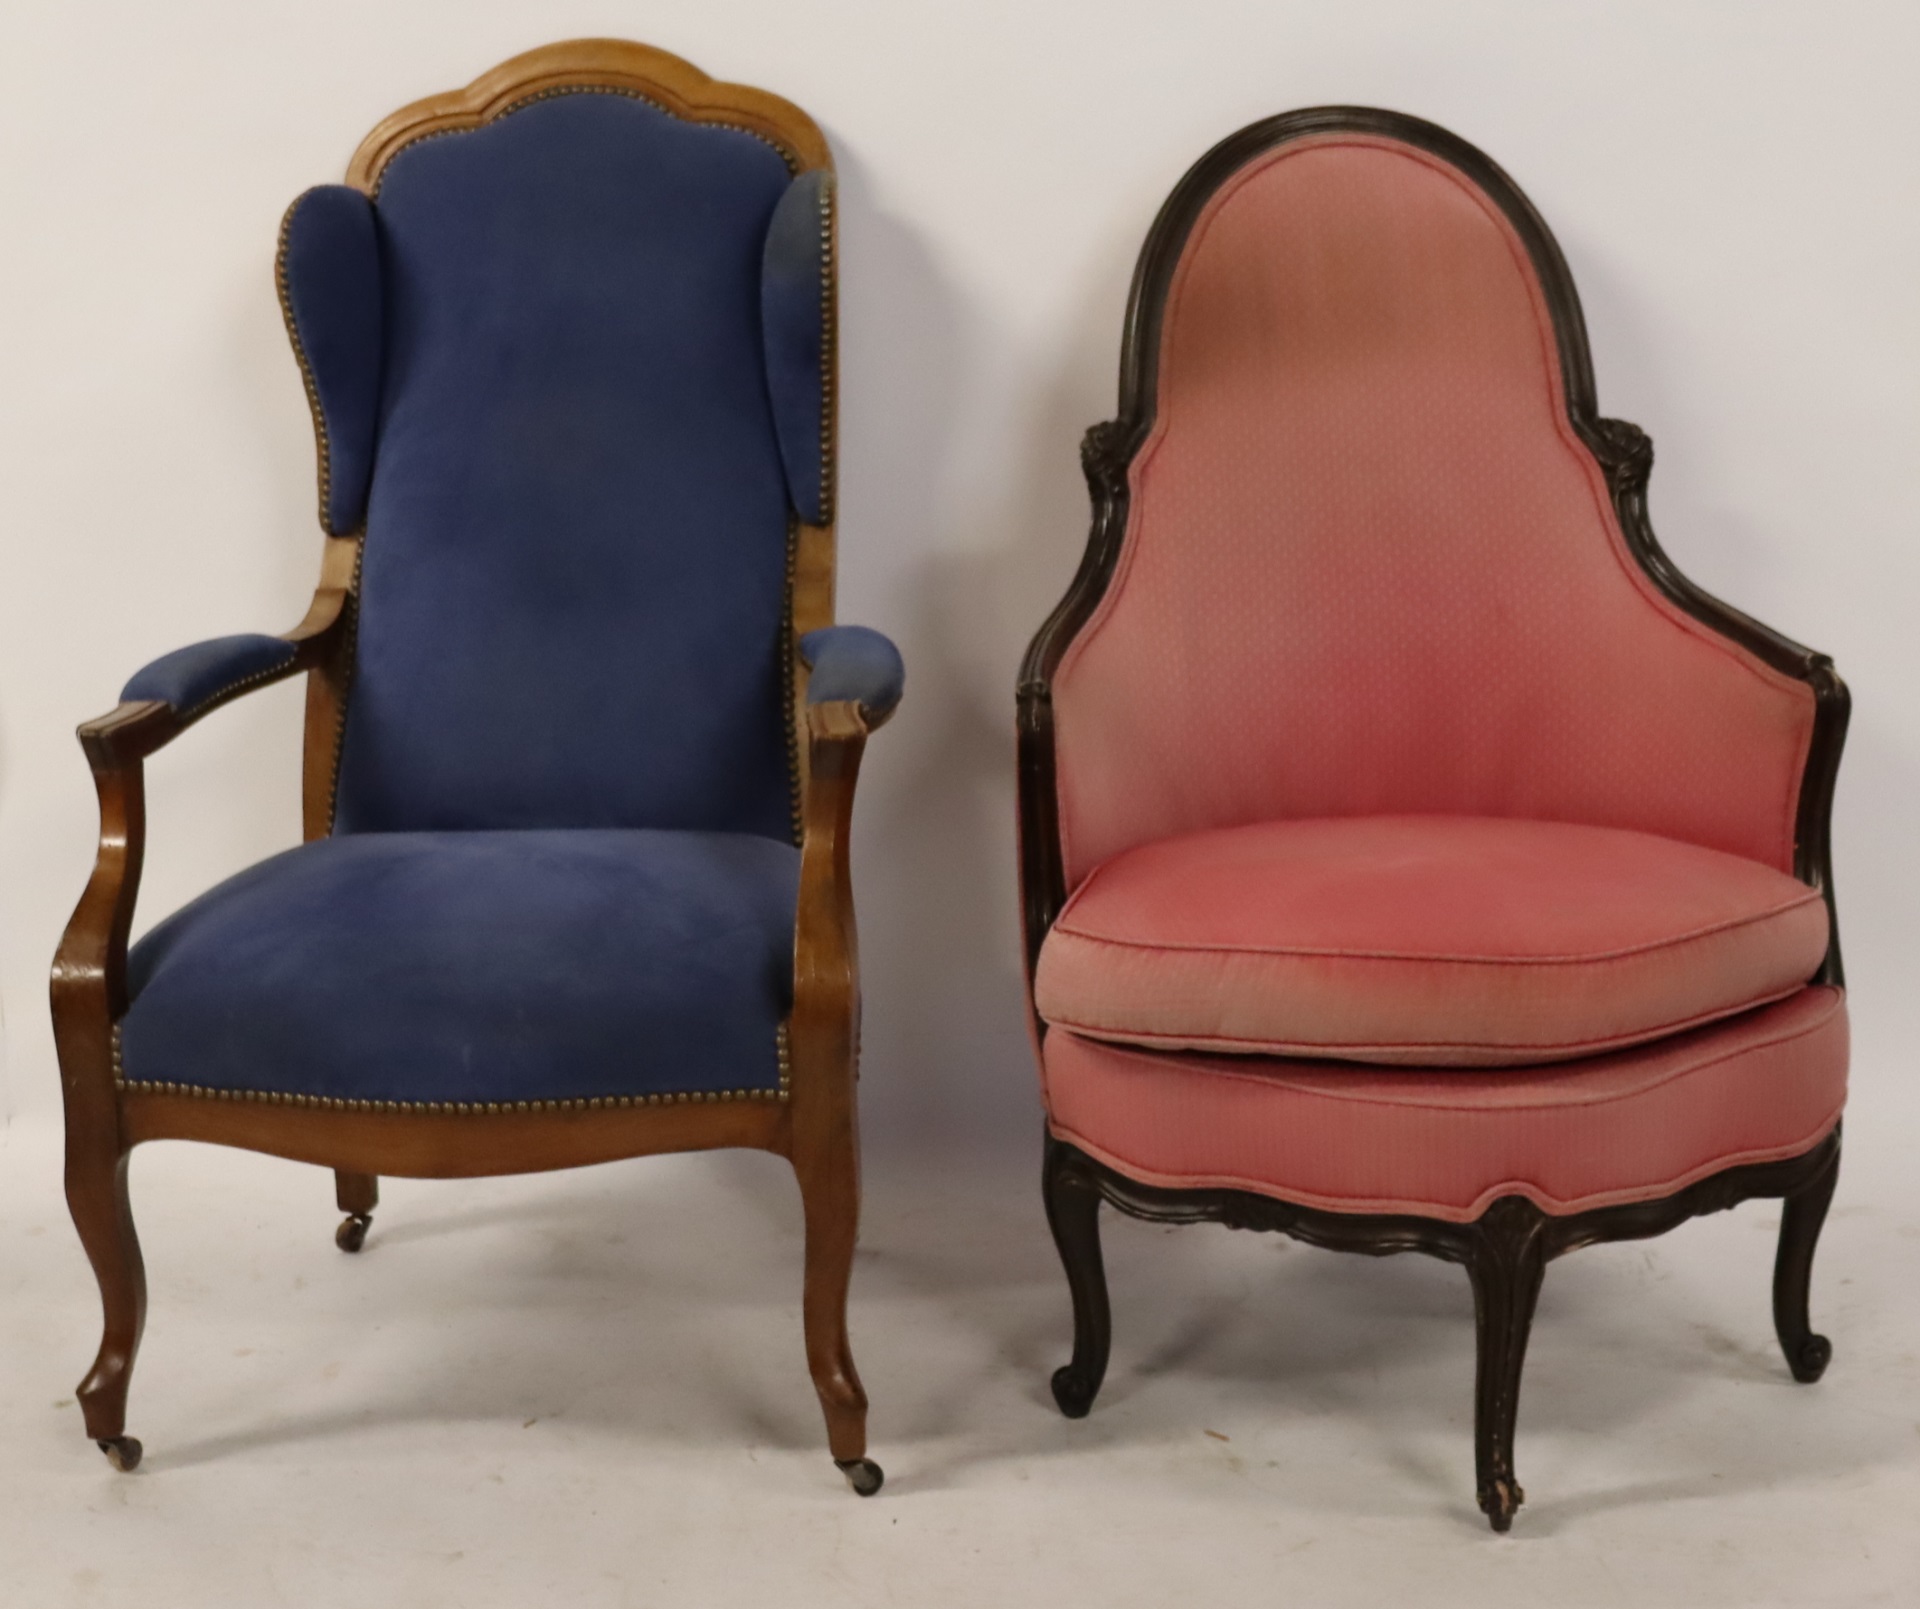 ANTIQUE LOUIS XV STYLE CHAIR TOGETHER 3bdf15